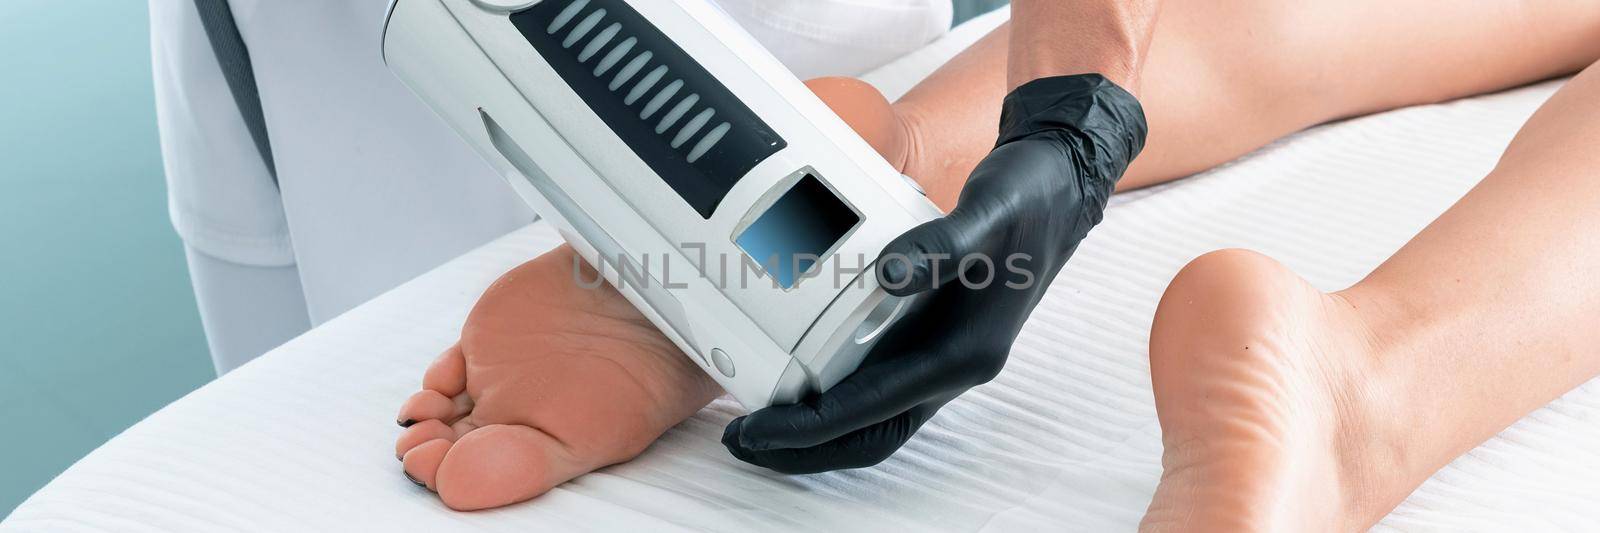 cosmetologist in rubber gloves doing endospheres therapy on female feet by Mariakray